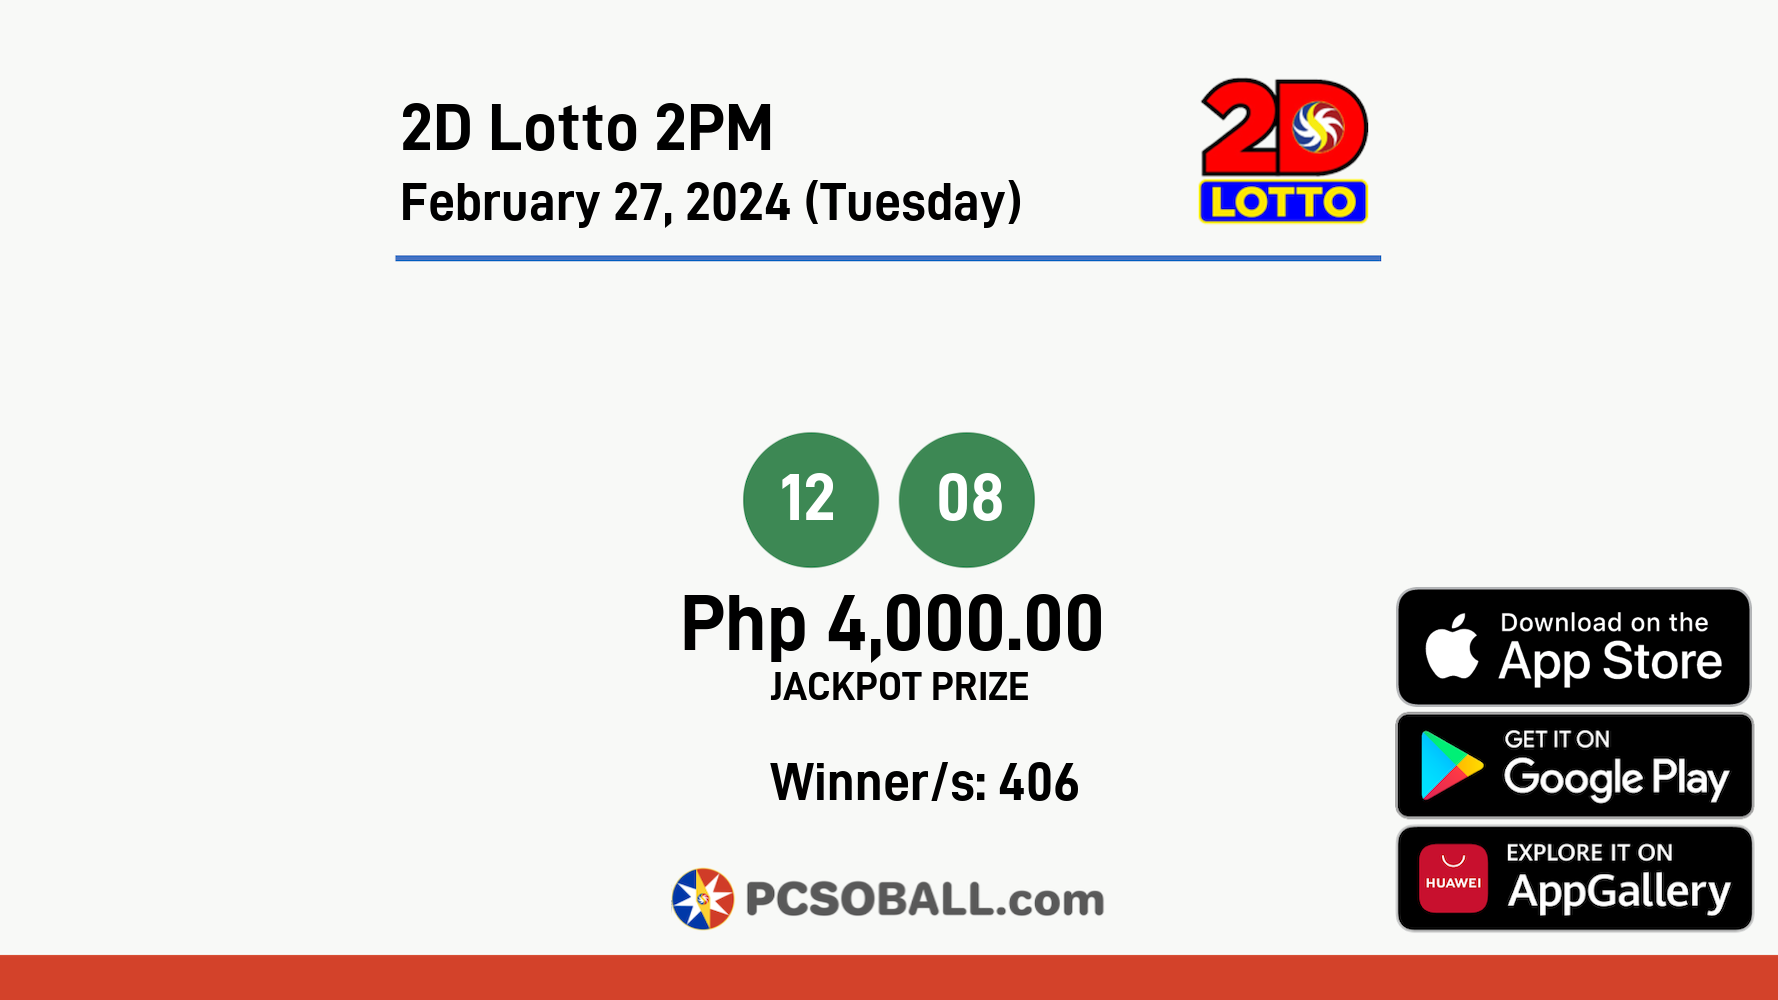 2D Lotto 2PM February 27, 2024 (Tuesday) Result